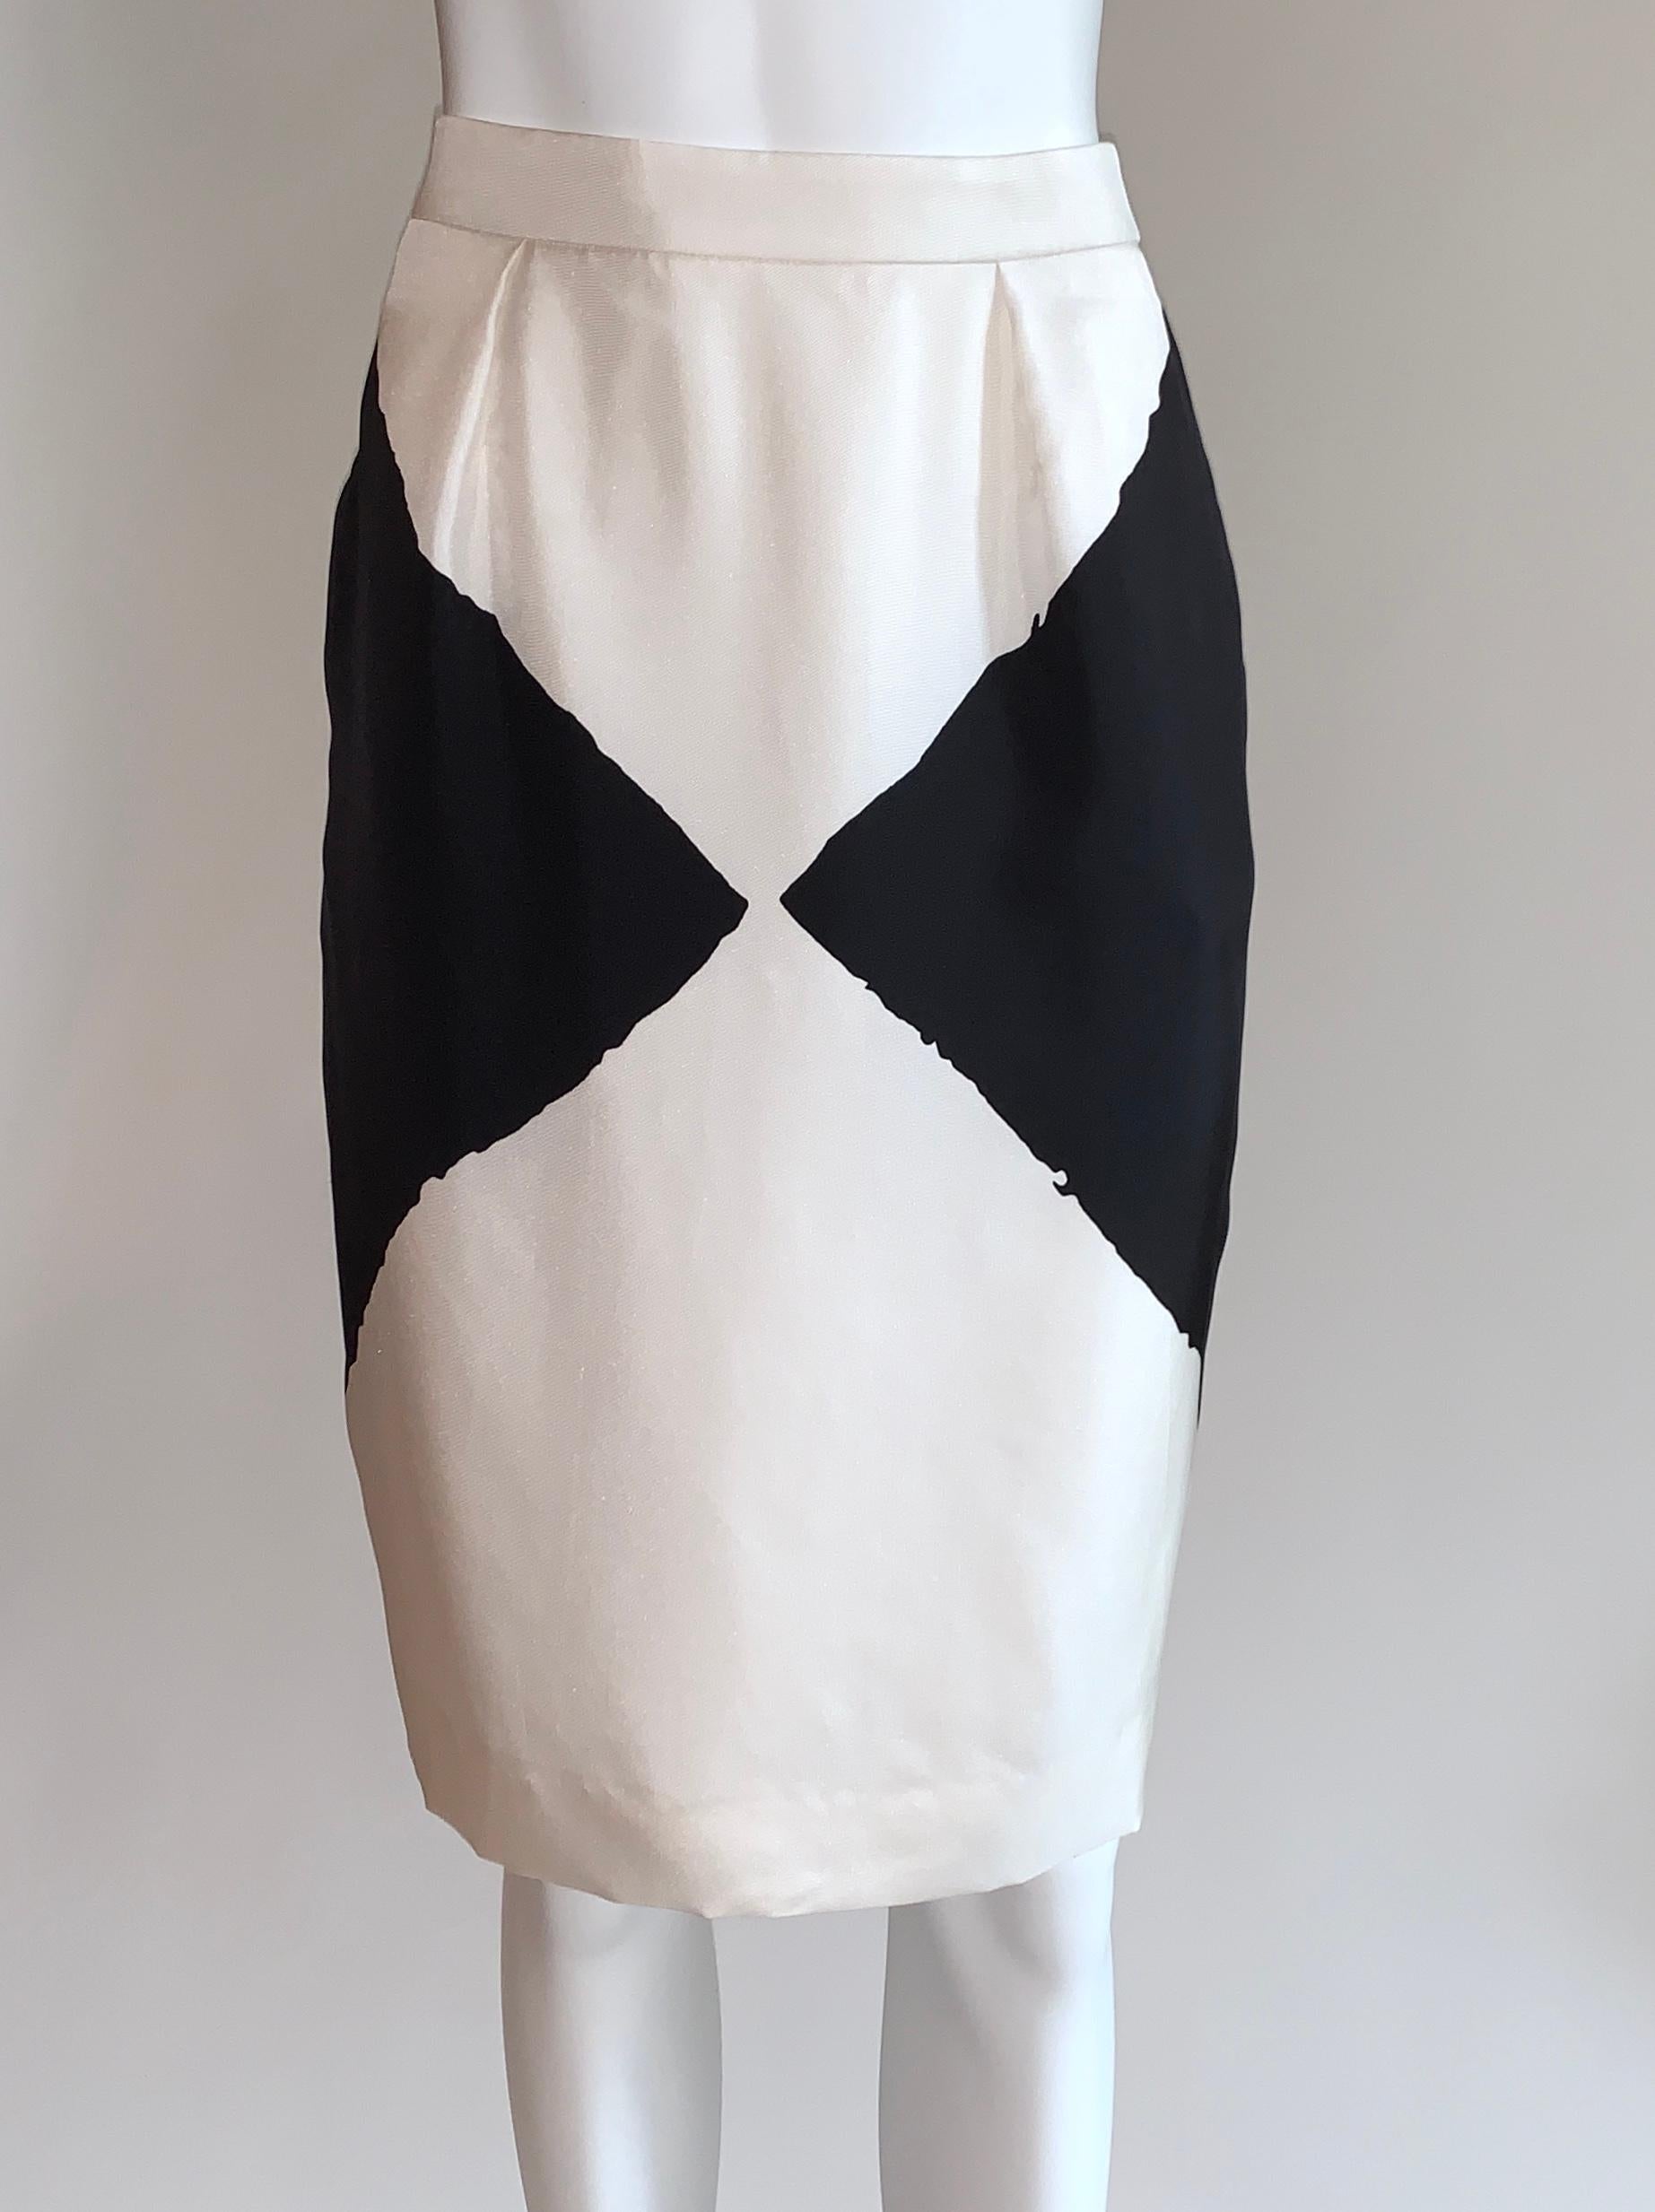 Yves Saint Laurent silk pencil skirt in a painterly black and white geometric print. Pockets at sides, side zip and button closure.

100% silk. 
Fully lined. 

Made in Italy.

Size FR 44, best fits XL, see measurements.
Waist 32